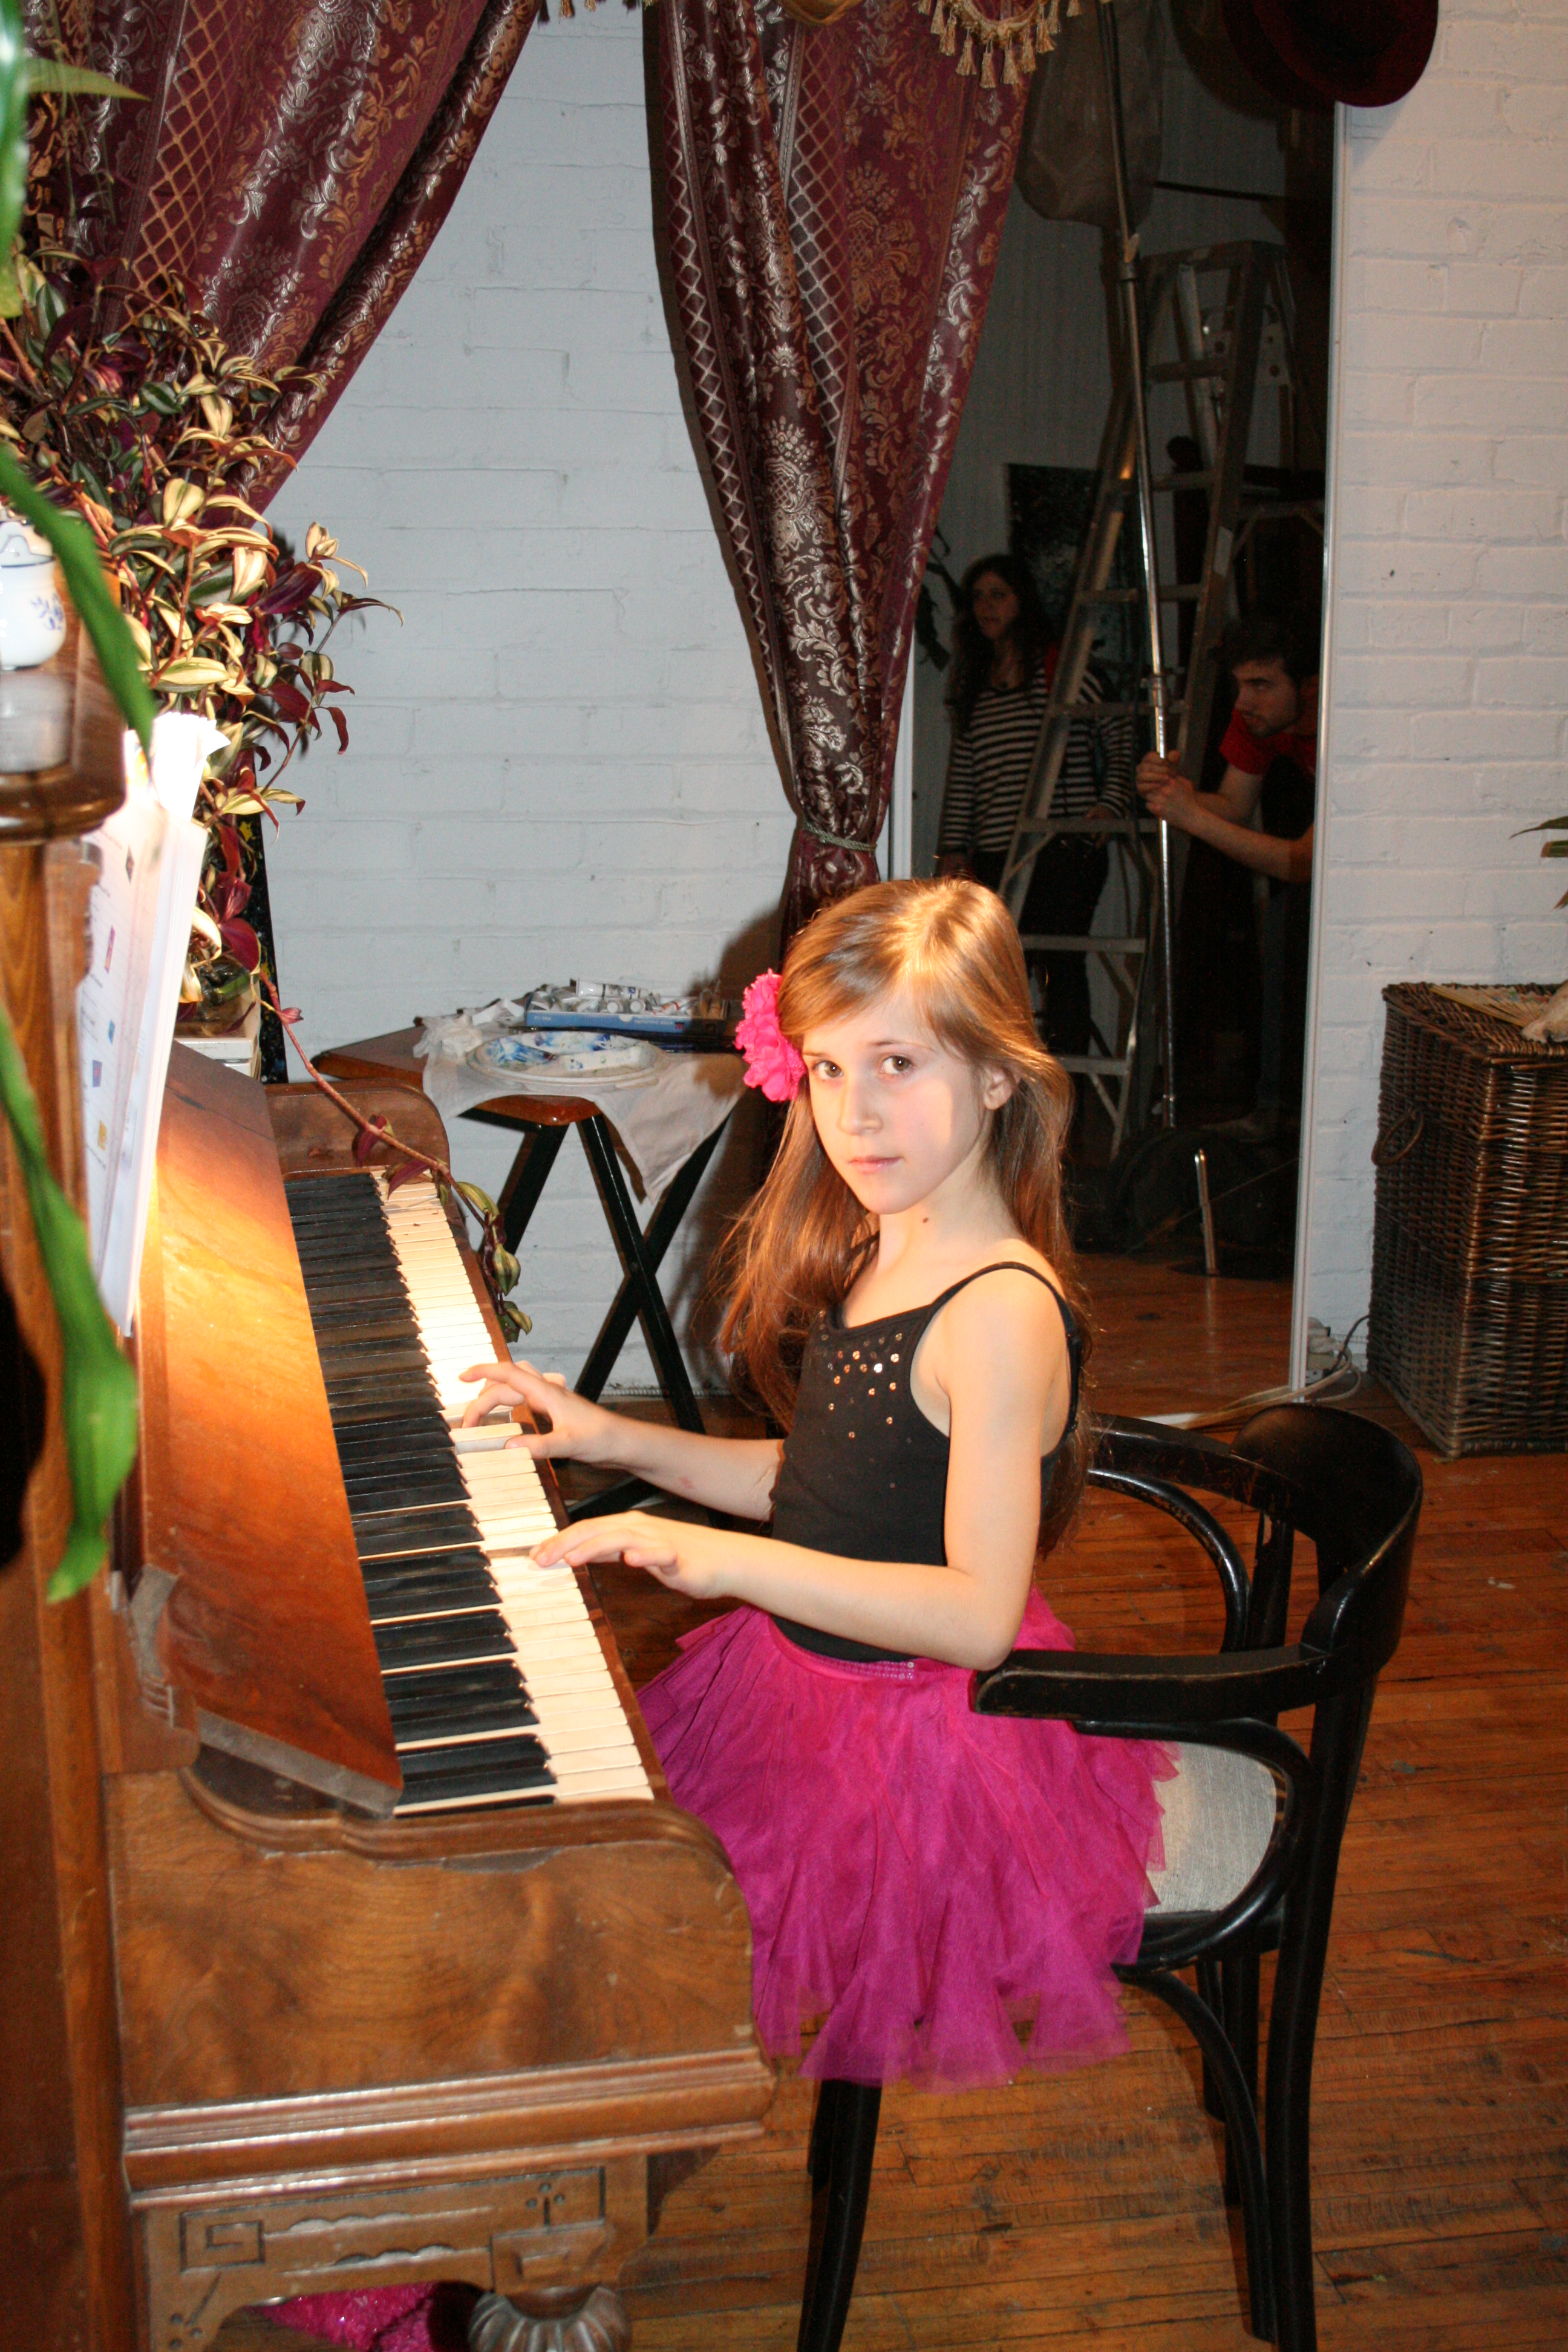 Gloria posing with the piano on the set of ABOUT THE AUTHOR.